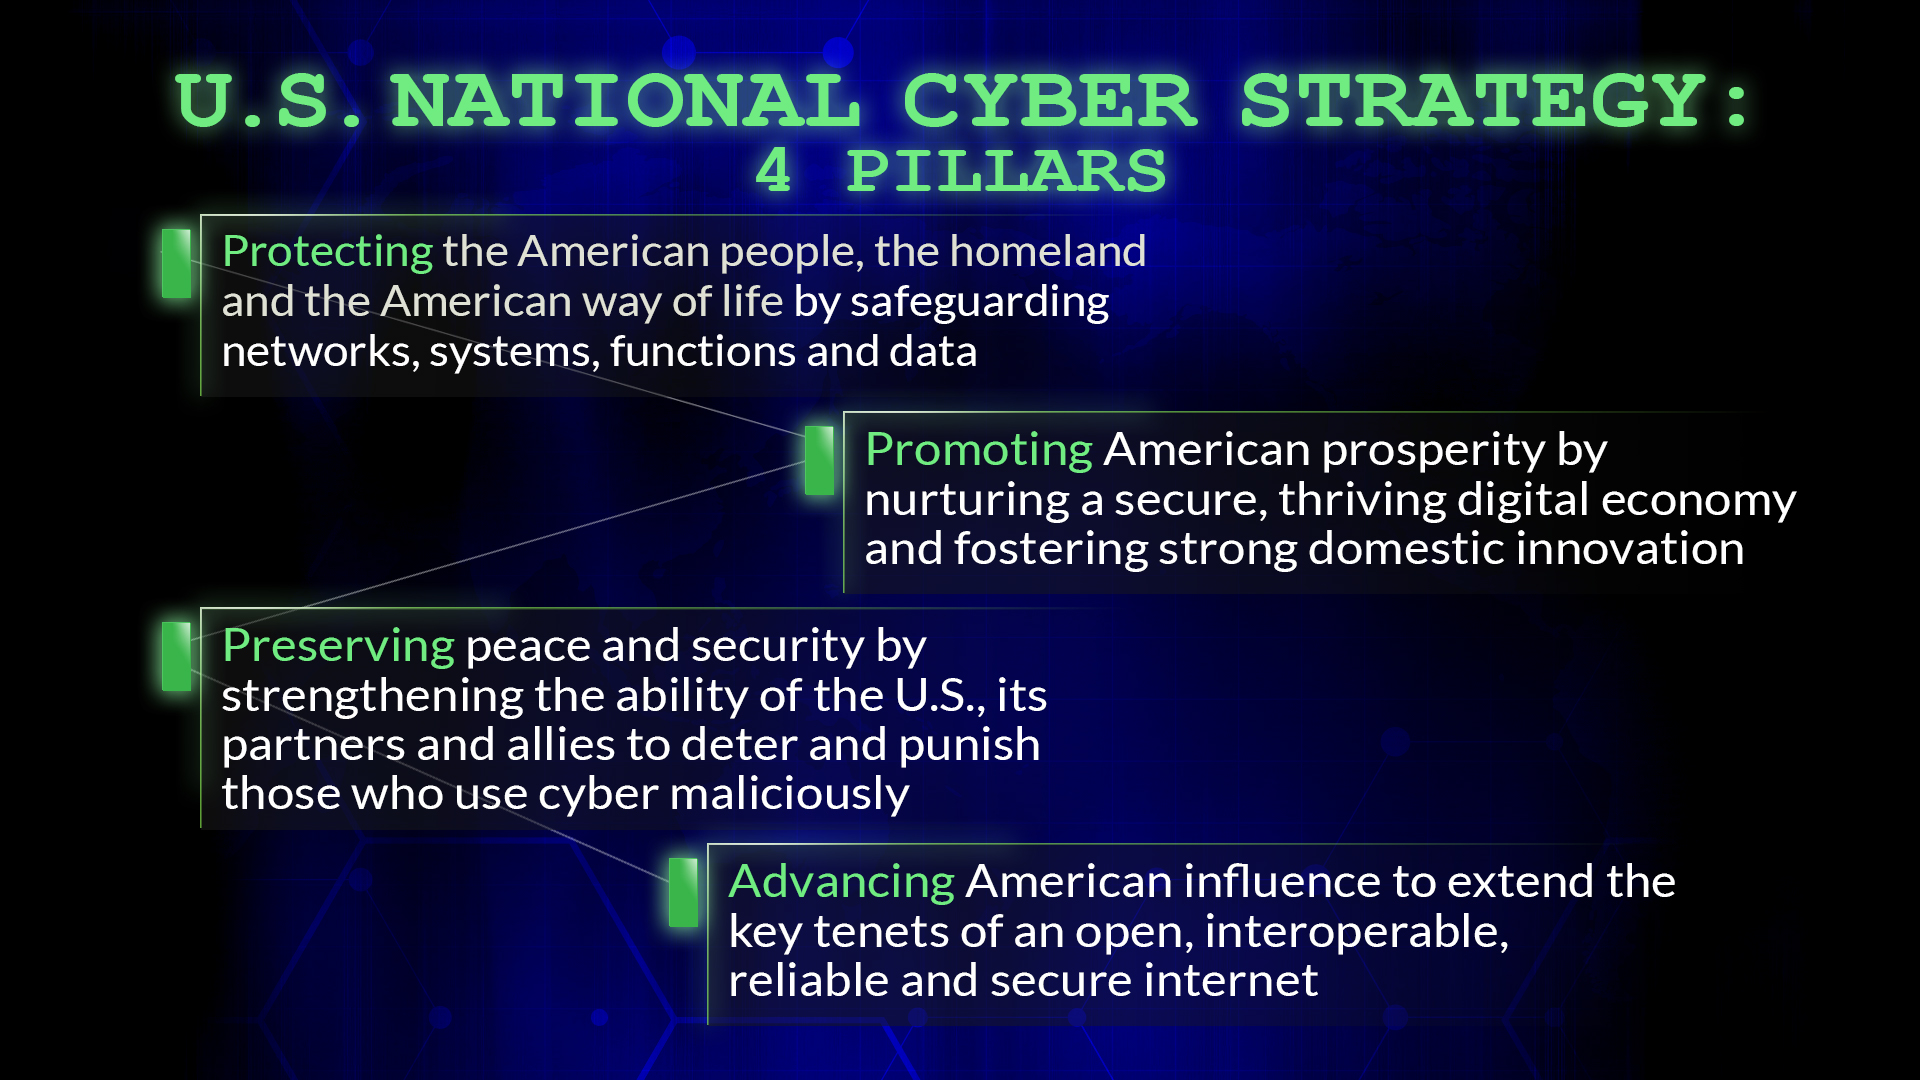 Dod S Cyber Strategy 5 Things To Know U S Department Of Defense Story